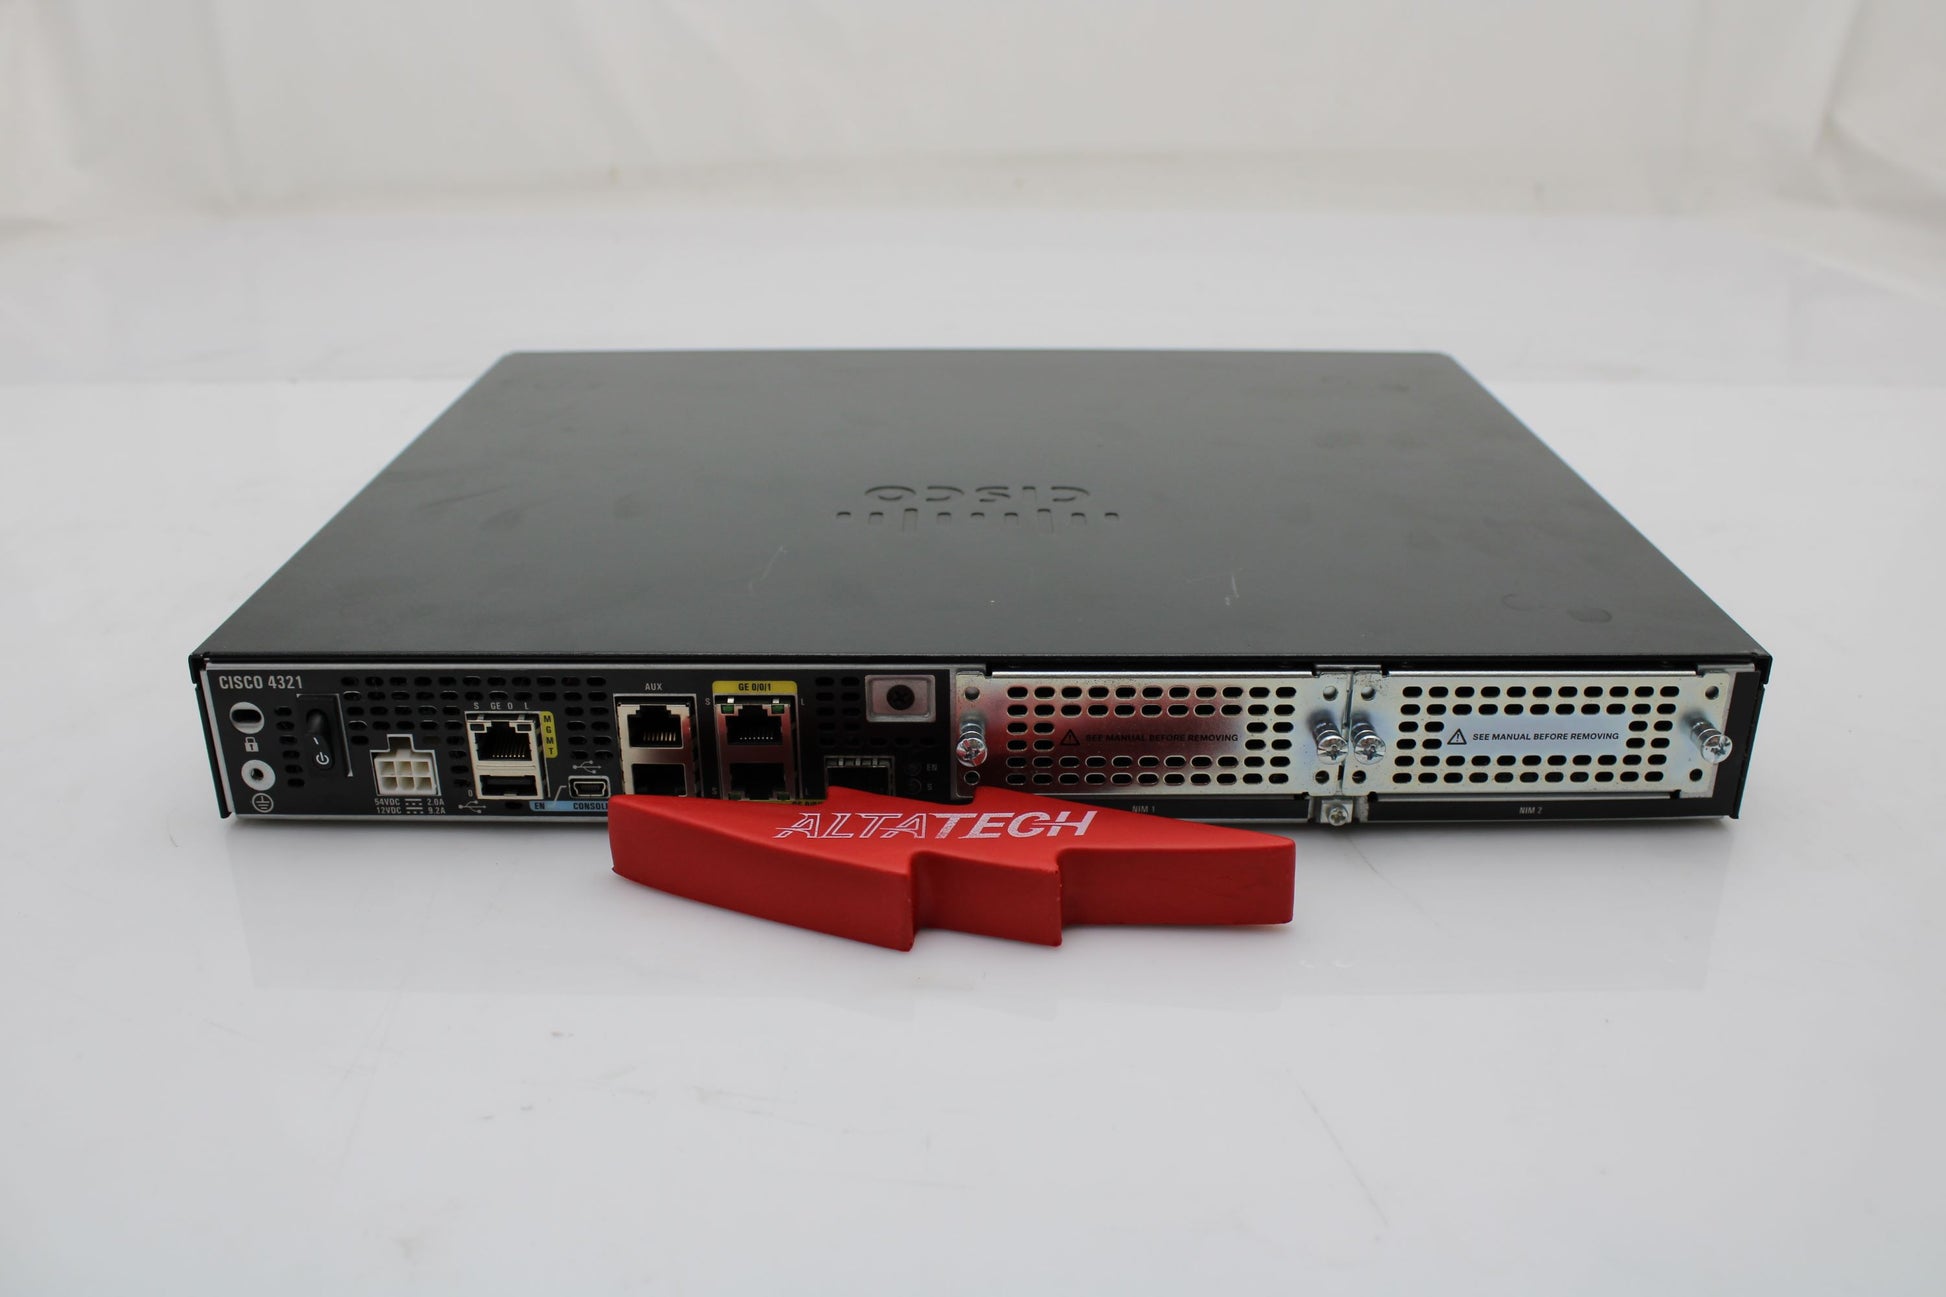 Cisco ISR4321-AX/K9 Cisco ISR4321-AX/K9 (2GE,2NIM,4G FLASH,4G DRAM,IP Base, Security, AppX), Used